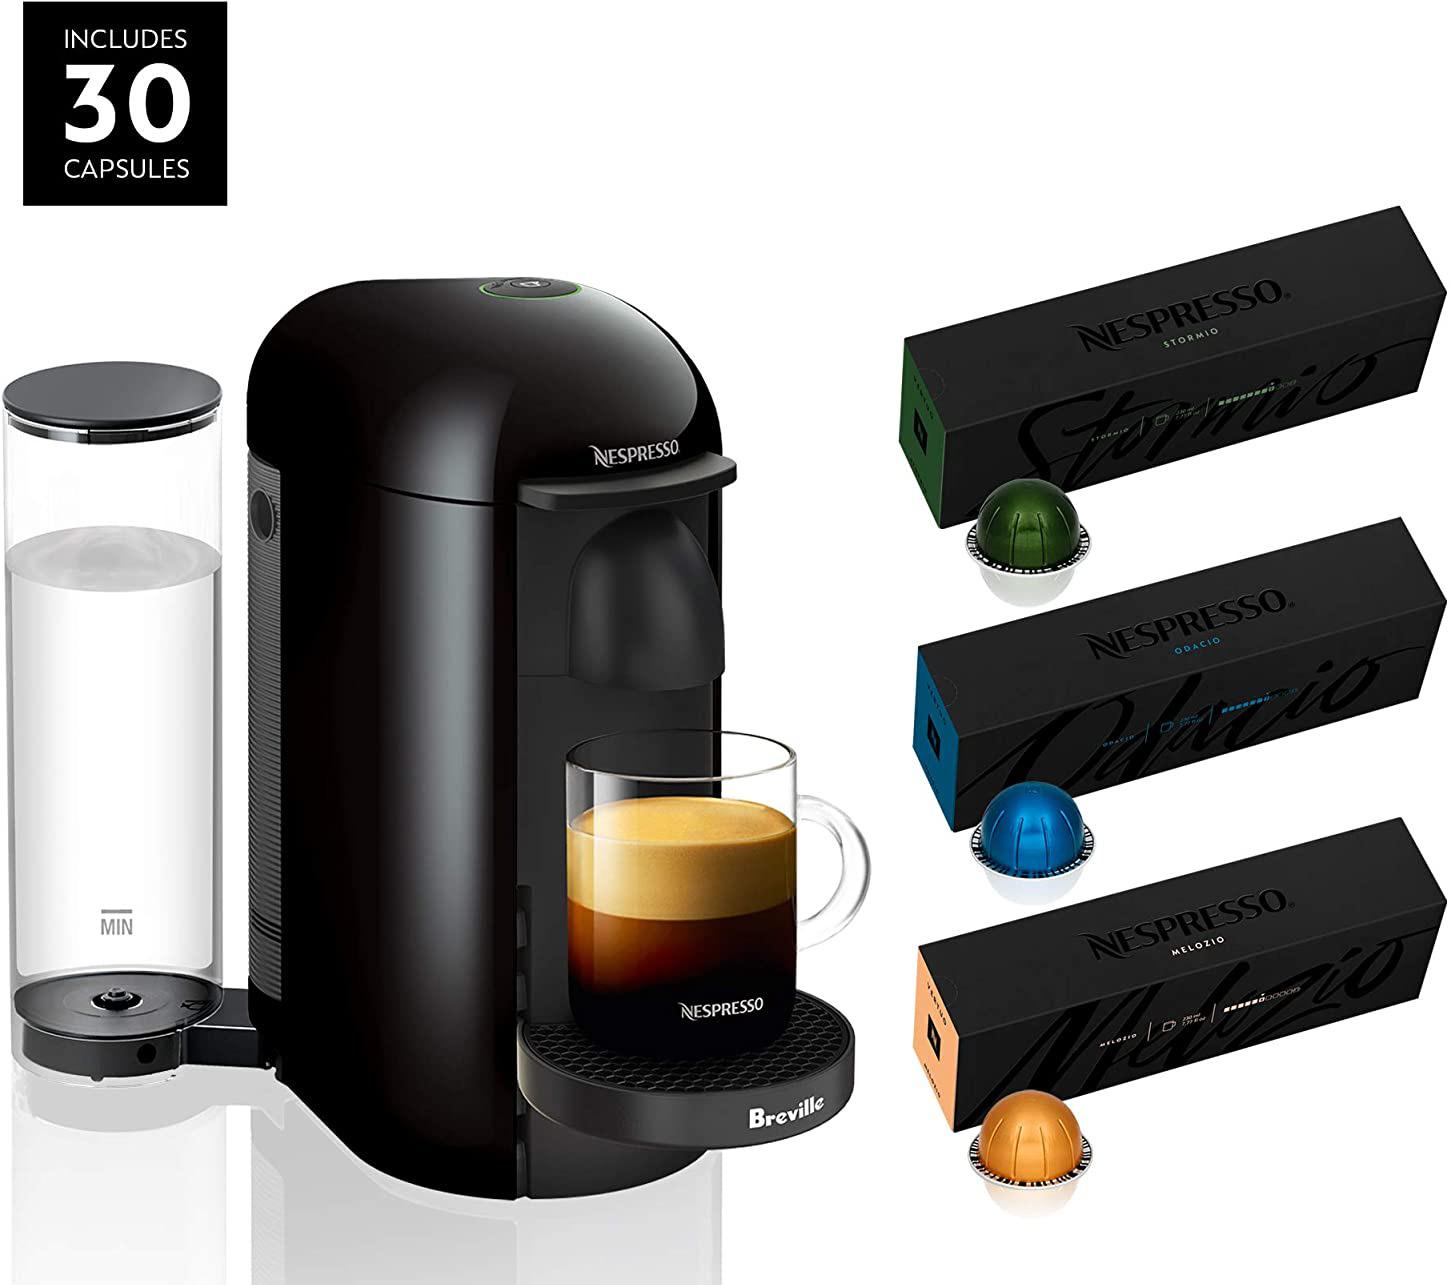 Nespresso VertuoPlus Coffee and Espresso Maker with Coffees for $109.99 Shipped